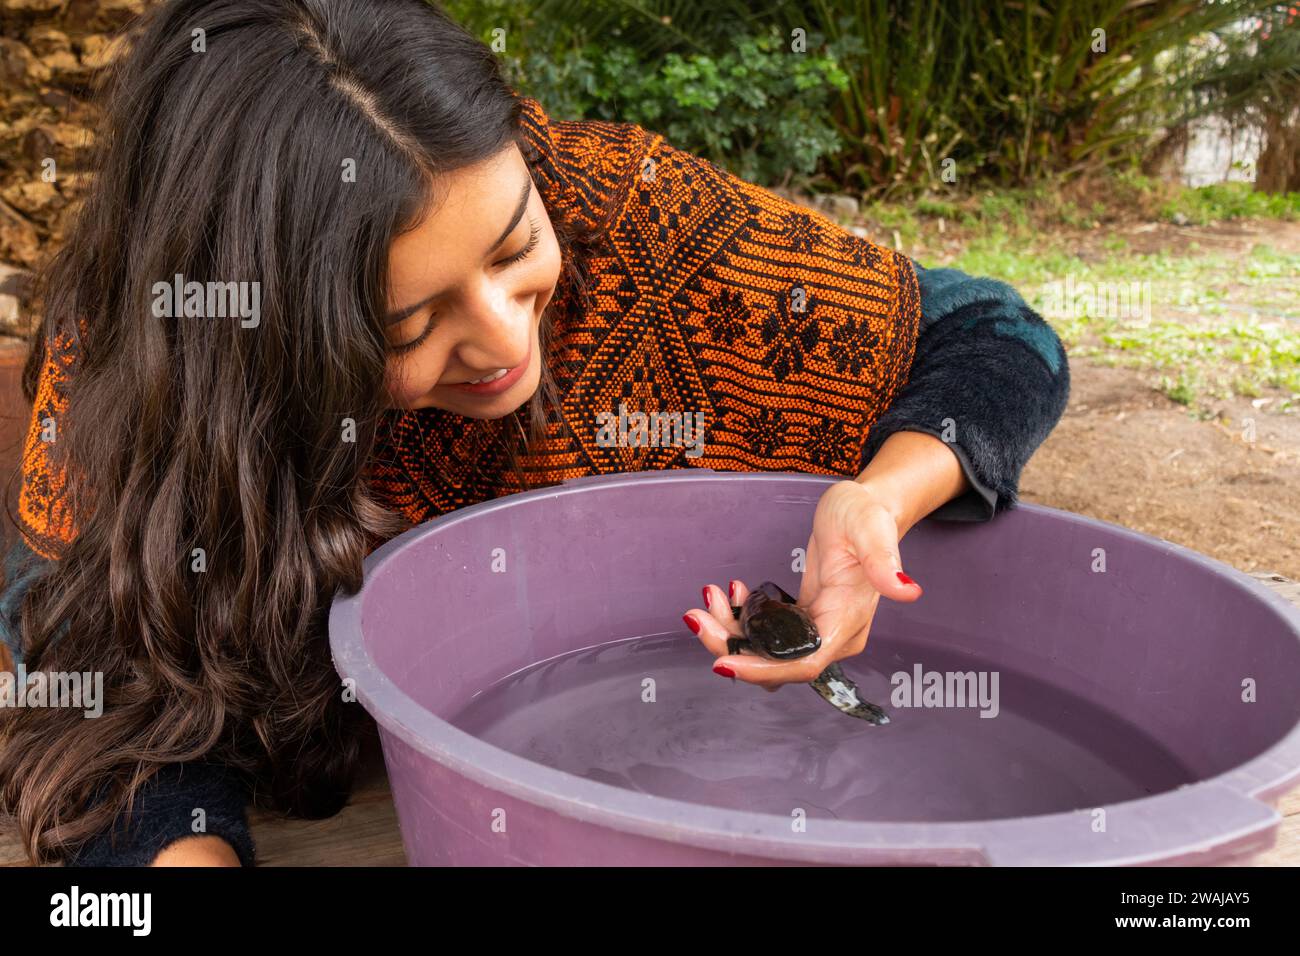 Woman gently holds a Mexican Ajolote in water showing a moment of care and conservation Stock Photo